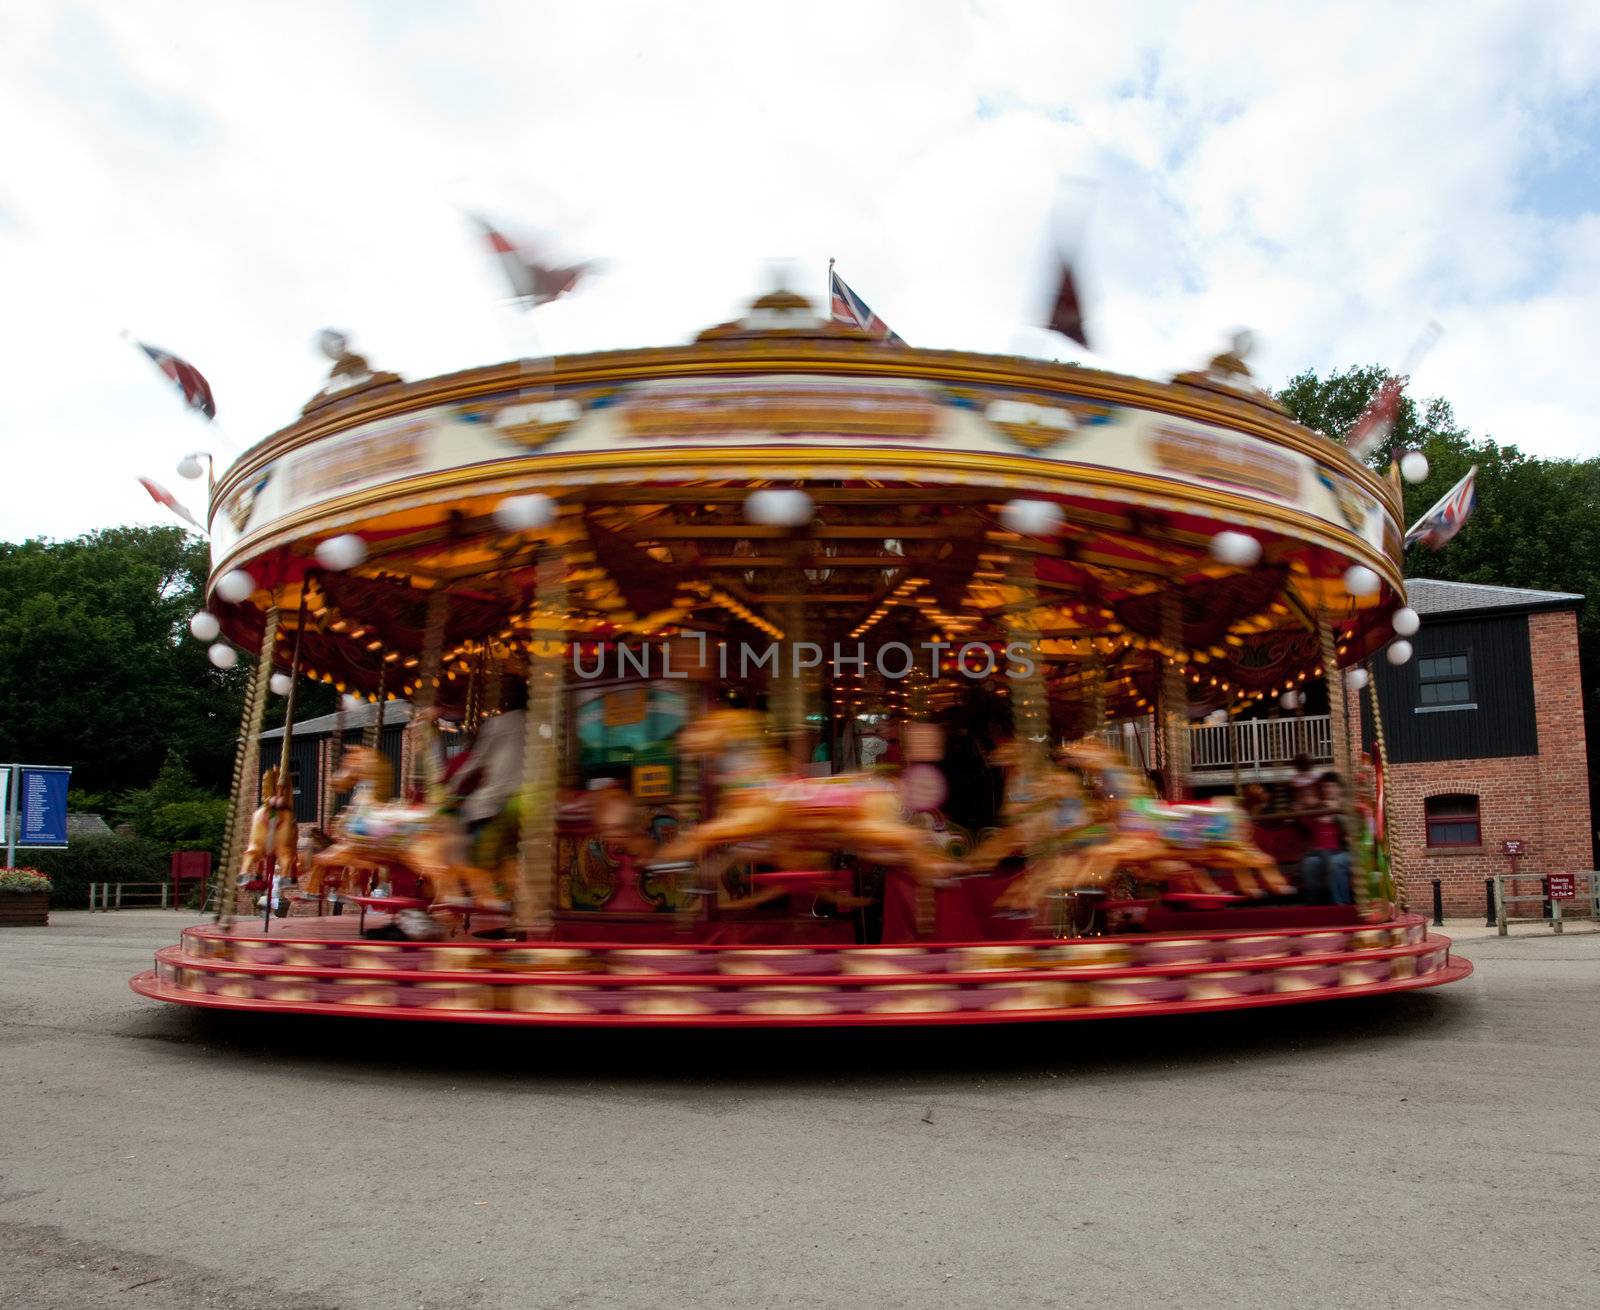 Antique carousel in England